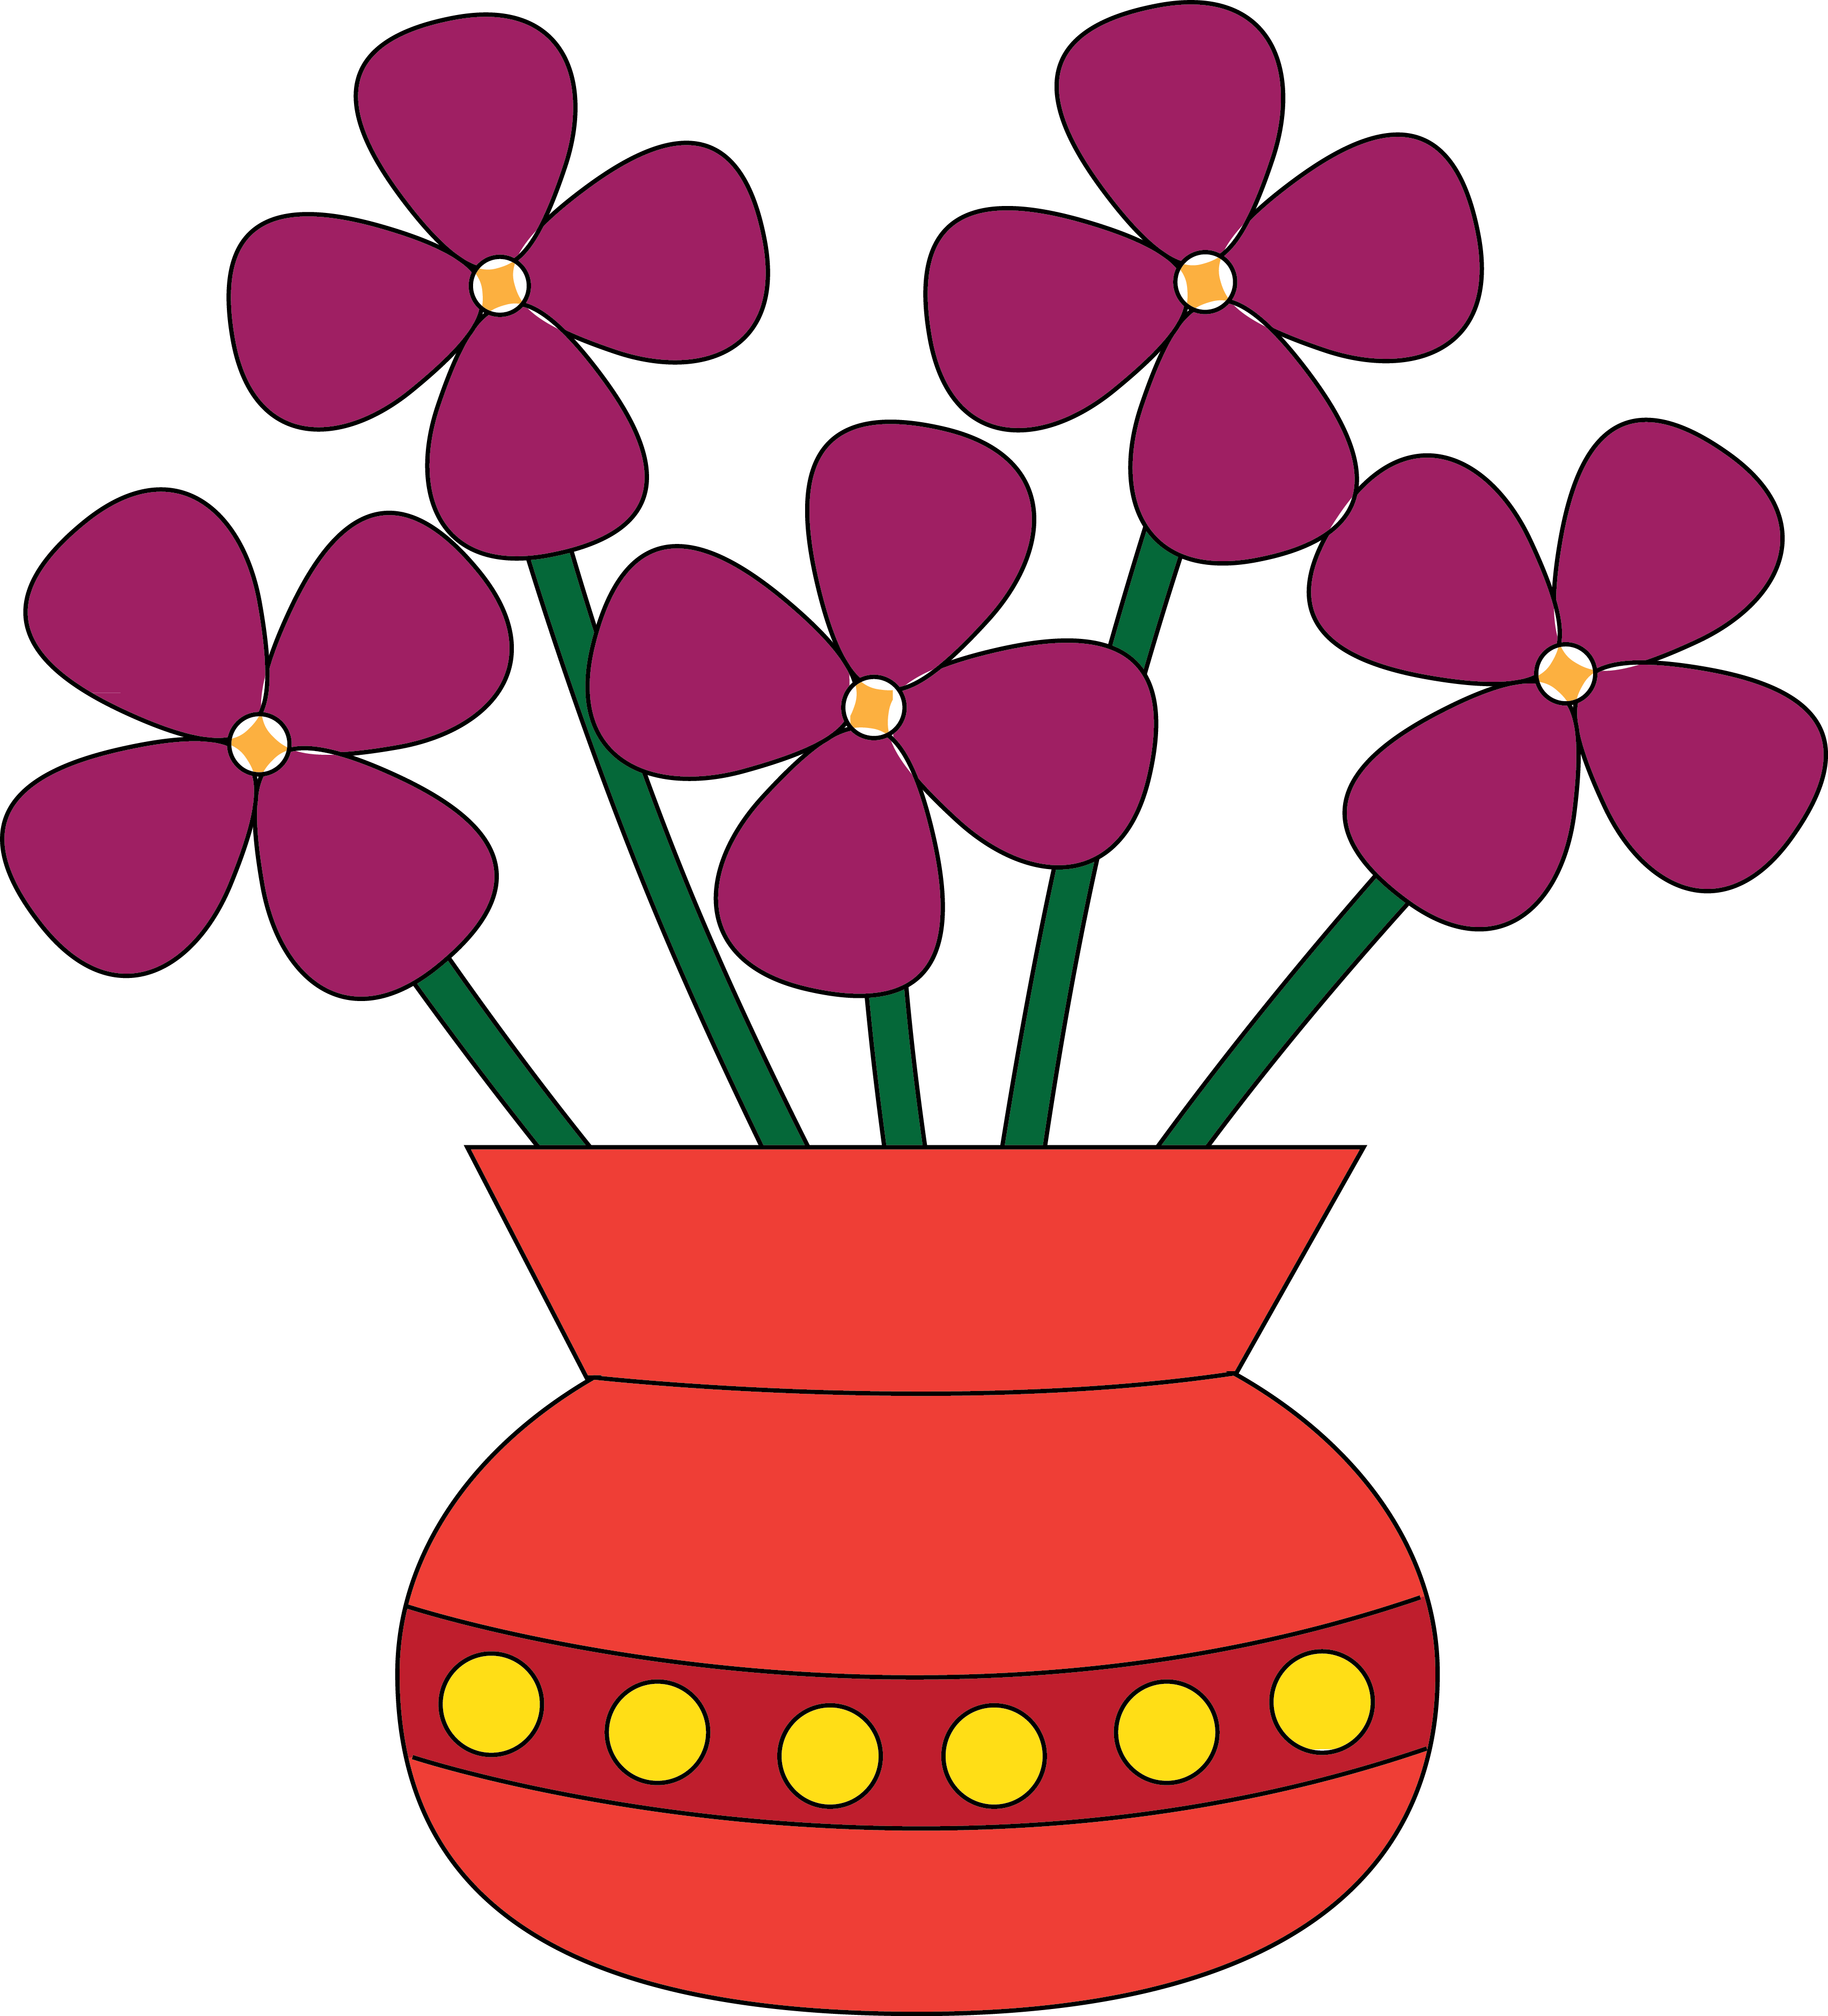 Flower Vases With Flowers Clipart.